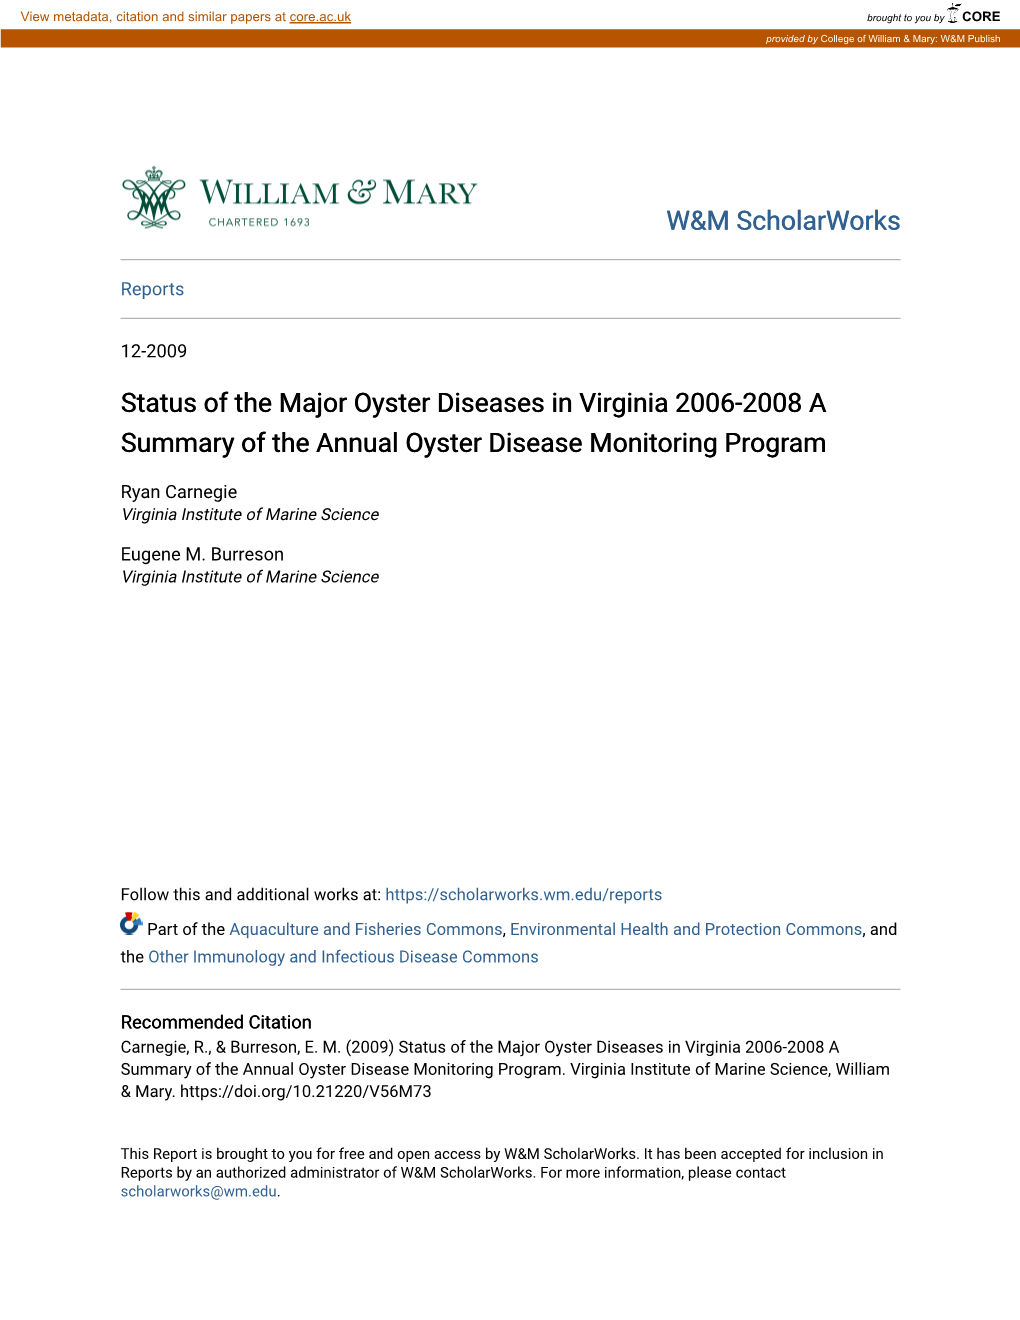 Status of the Major Oyster Diseases in Virginia 2006-2008 a Summary of the Annual Oyster Disease Monitoring Program